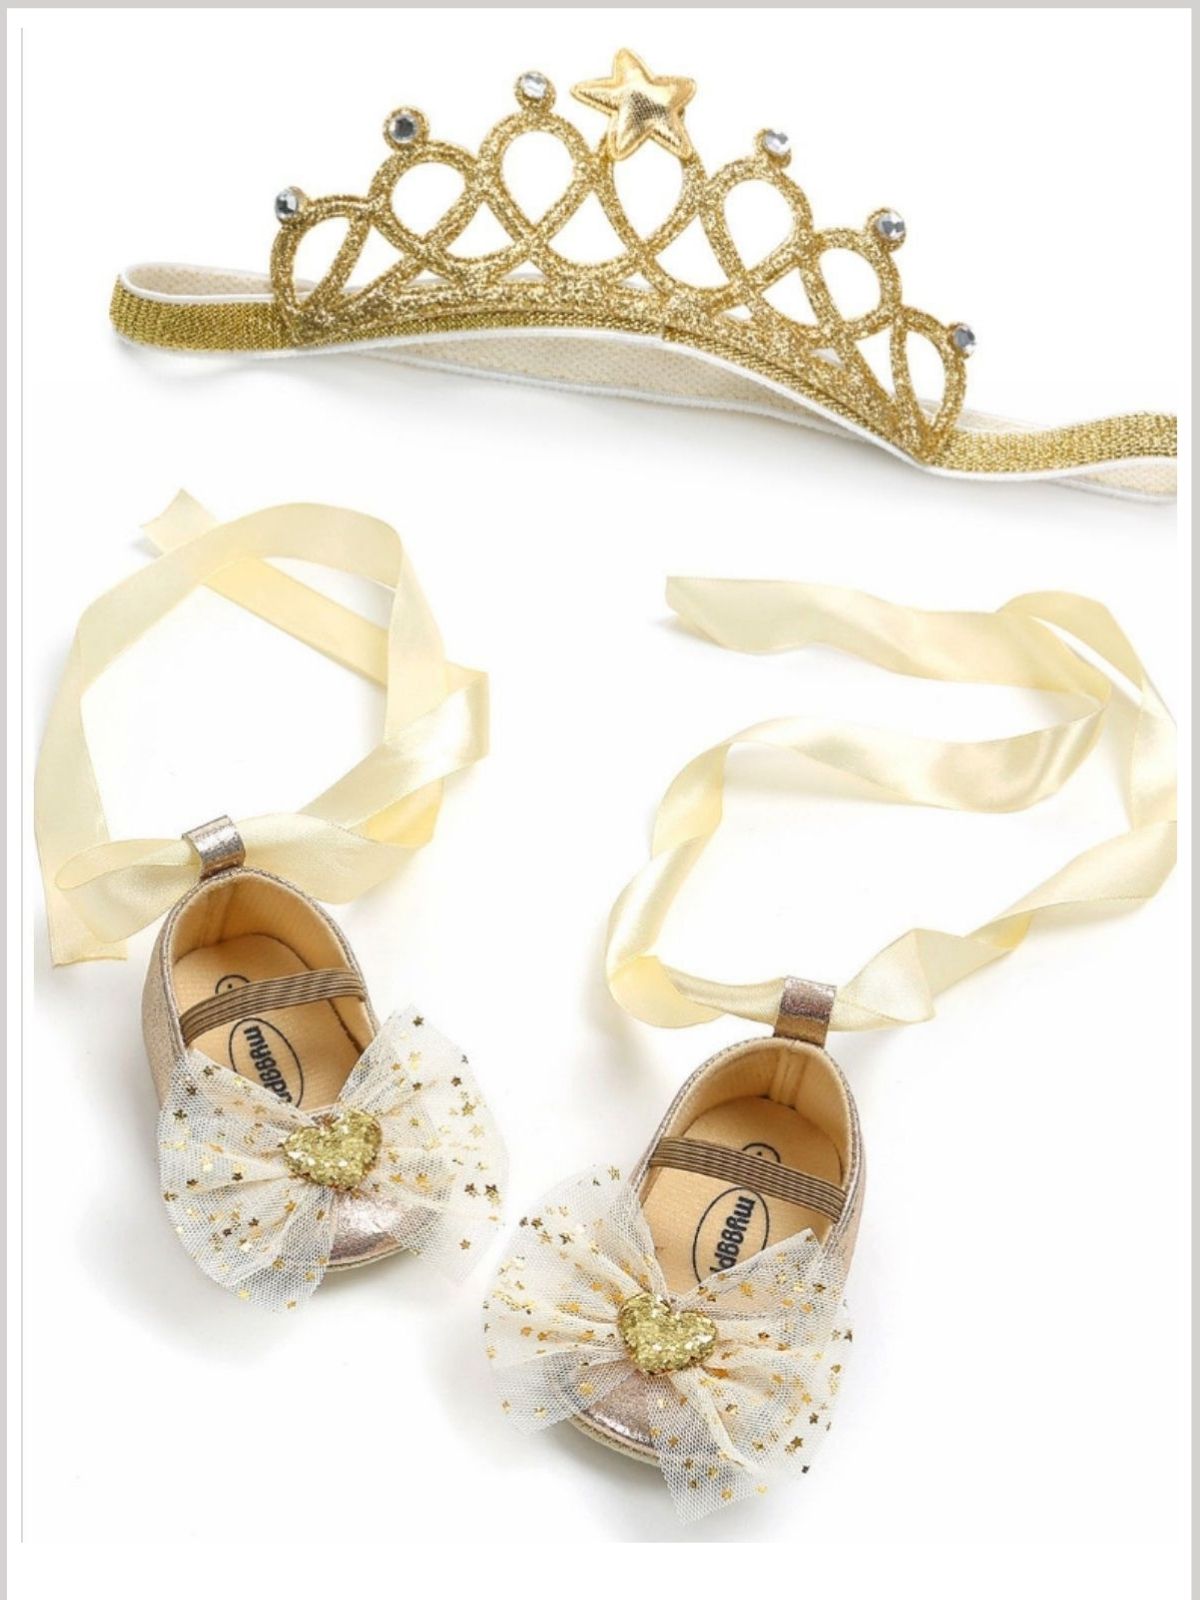 Baby Little Princess Crown Headband and Shoes Set